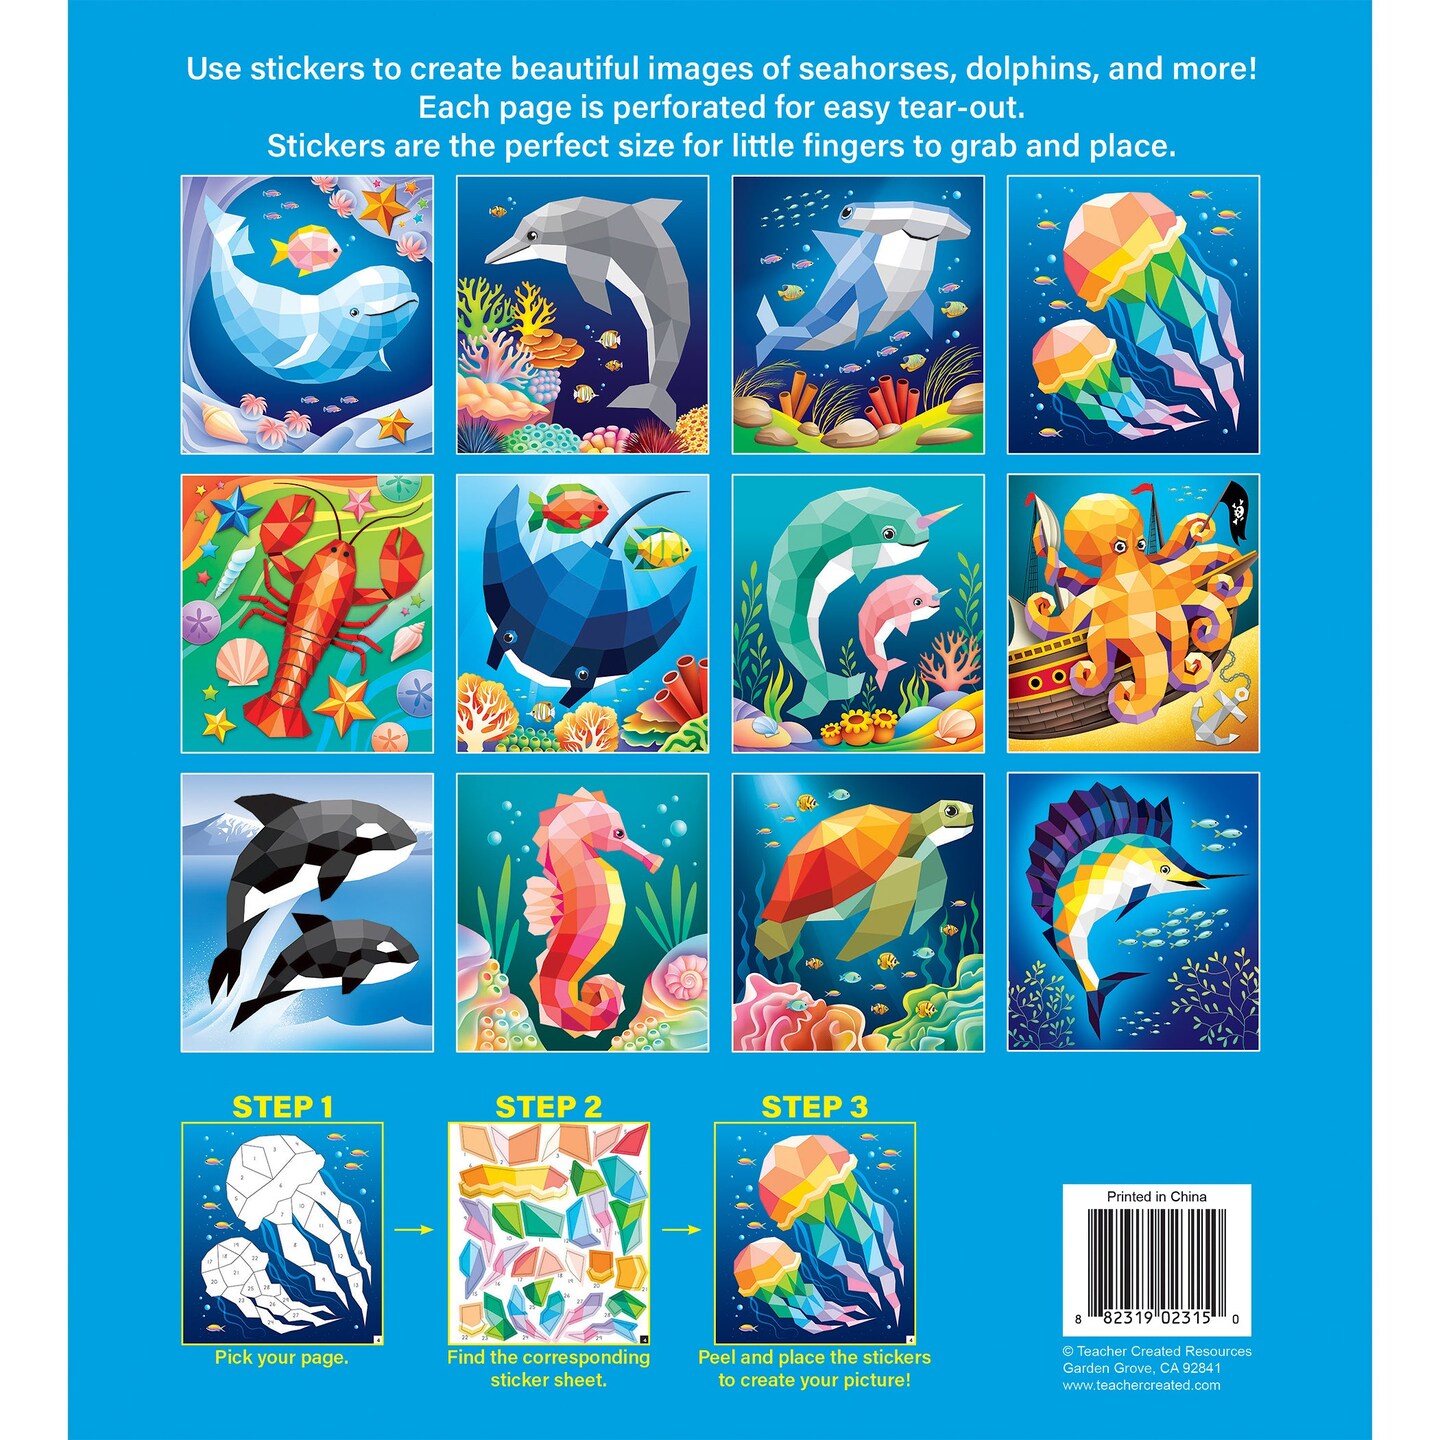 Ocean Life Modern Mosaics Stick to the Numbers Activity Book, Pack of 2